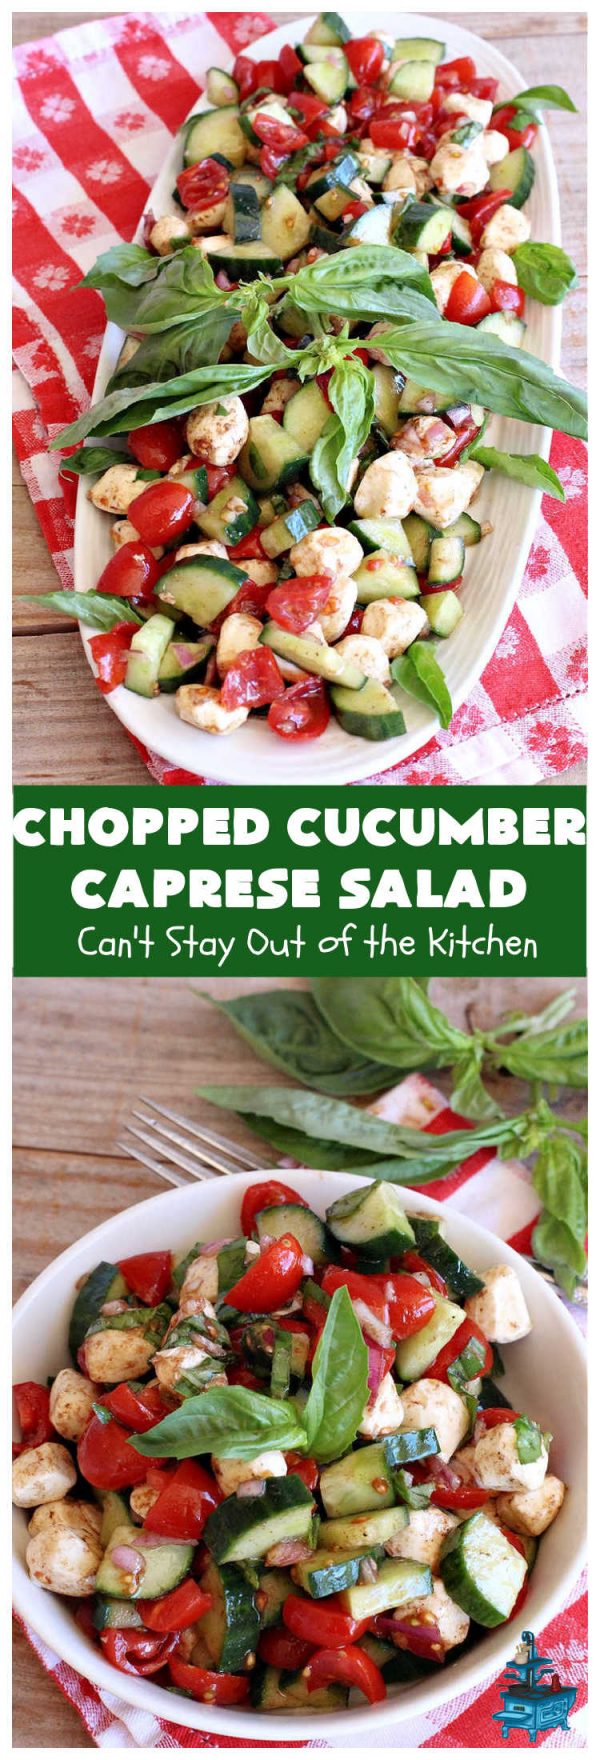 Chopped Cucumber Caprese Salad – Can't Stay Out of the Kitchen